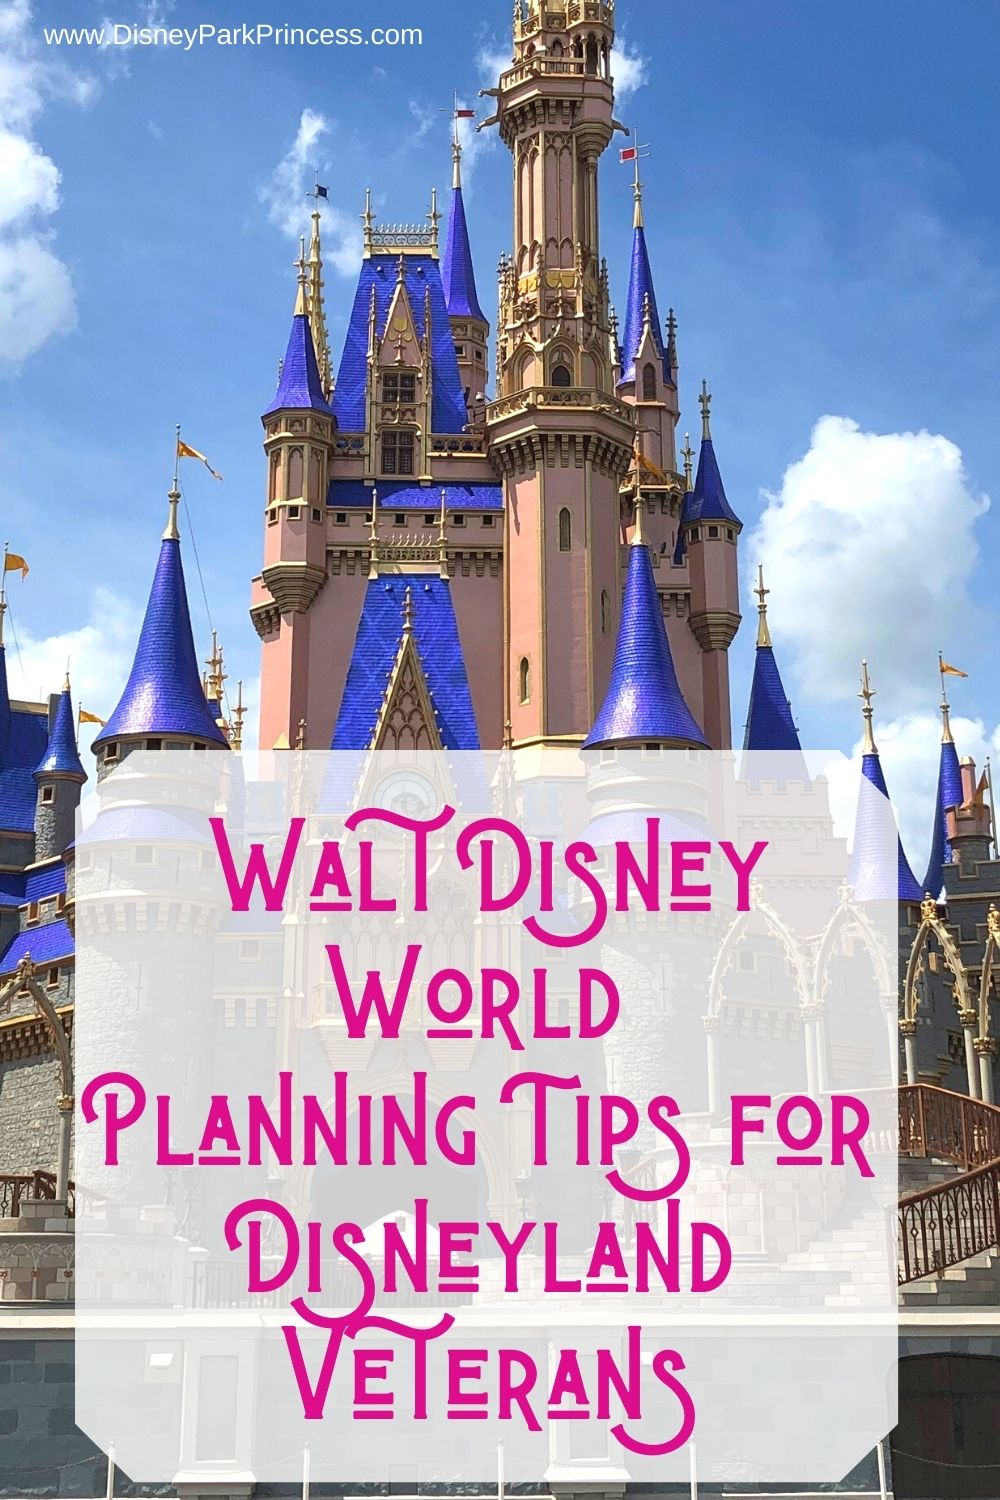 If you're familiar with Disneyland but are planning your first visit to Walt Disney World, these are the planning tips for you! #waltdisneyworld #disney #planning